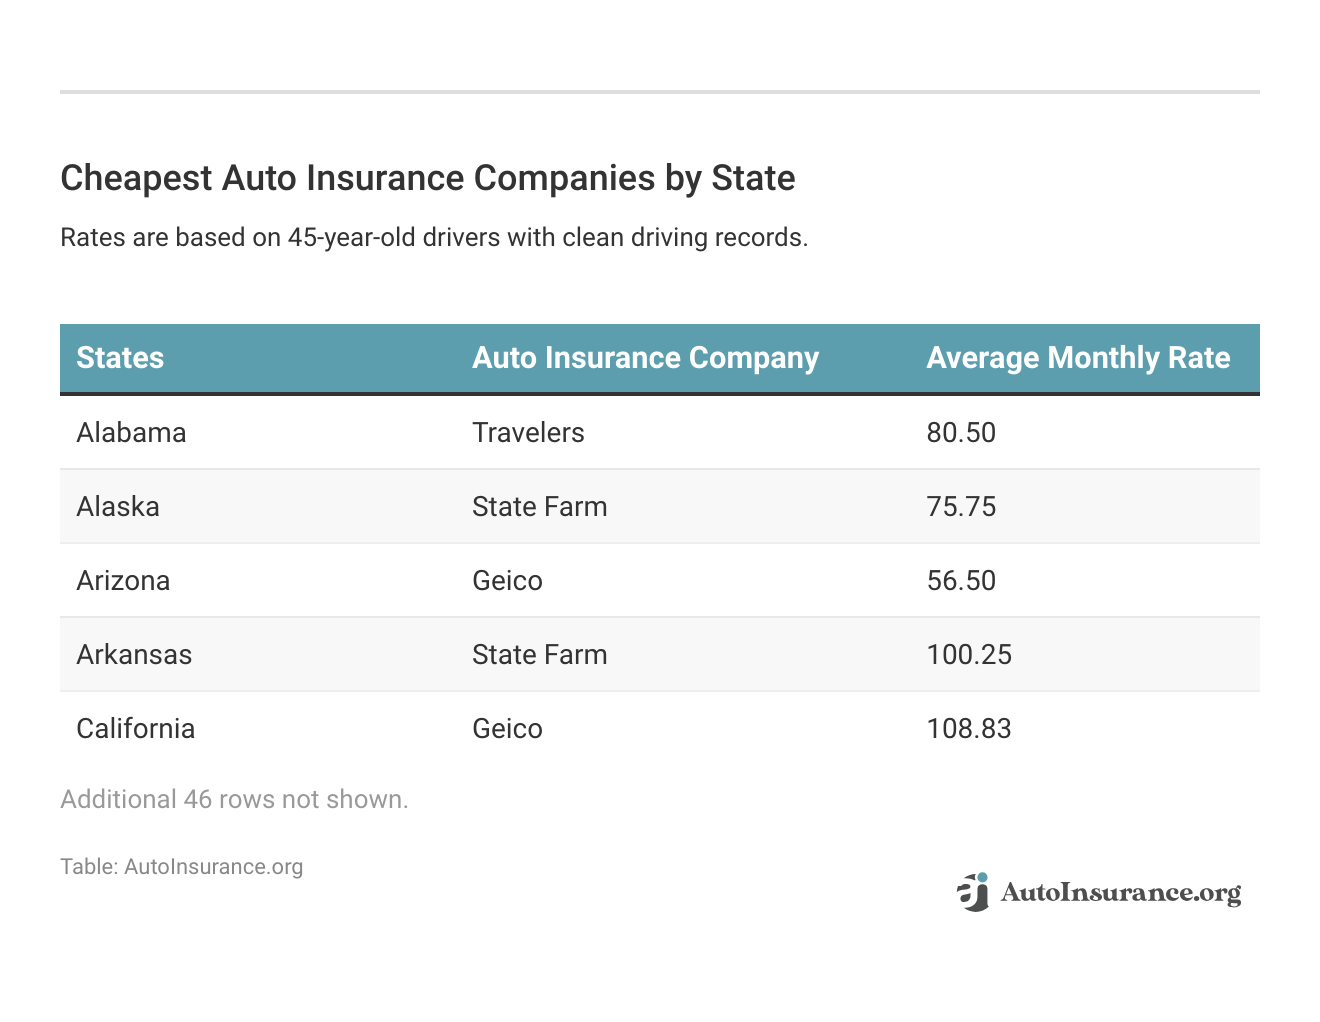 <h3>Cheapest Auto Insurance Companies by State</h3>